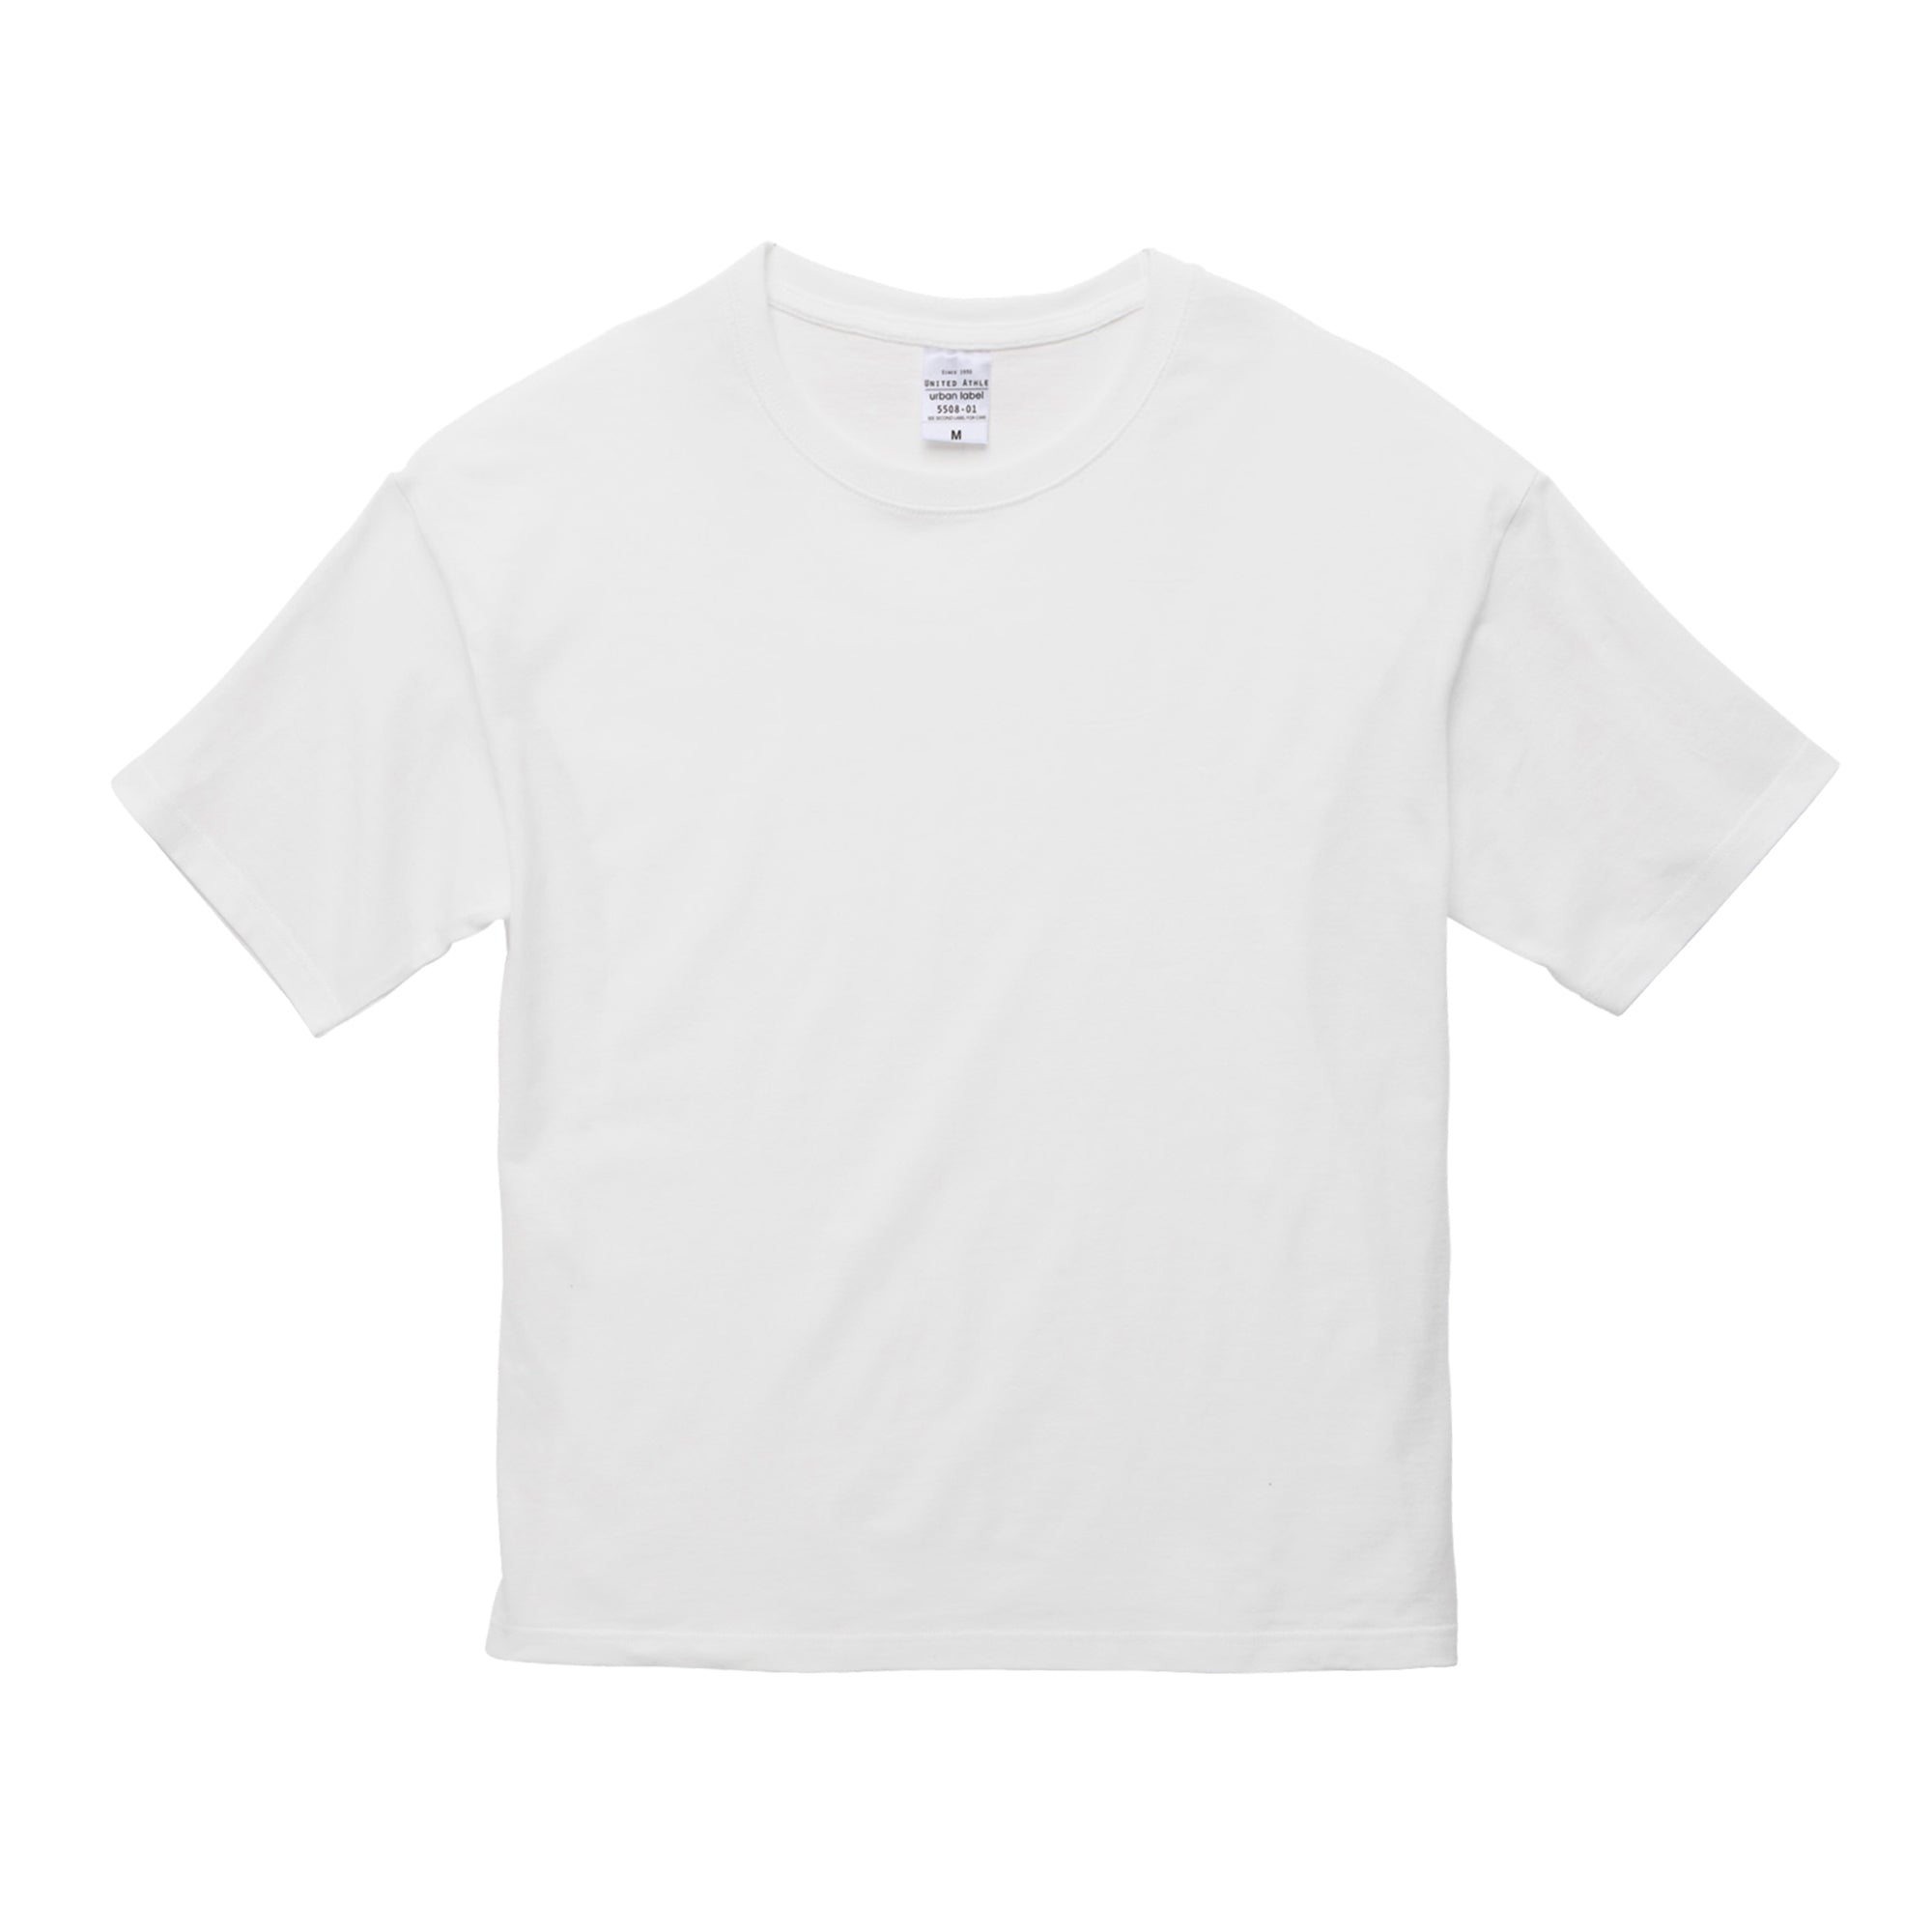 5508 - Heavyweight 5.6 oz Loose Fit T-shirt - White